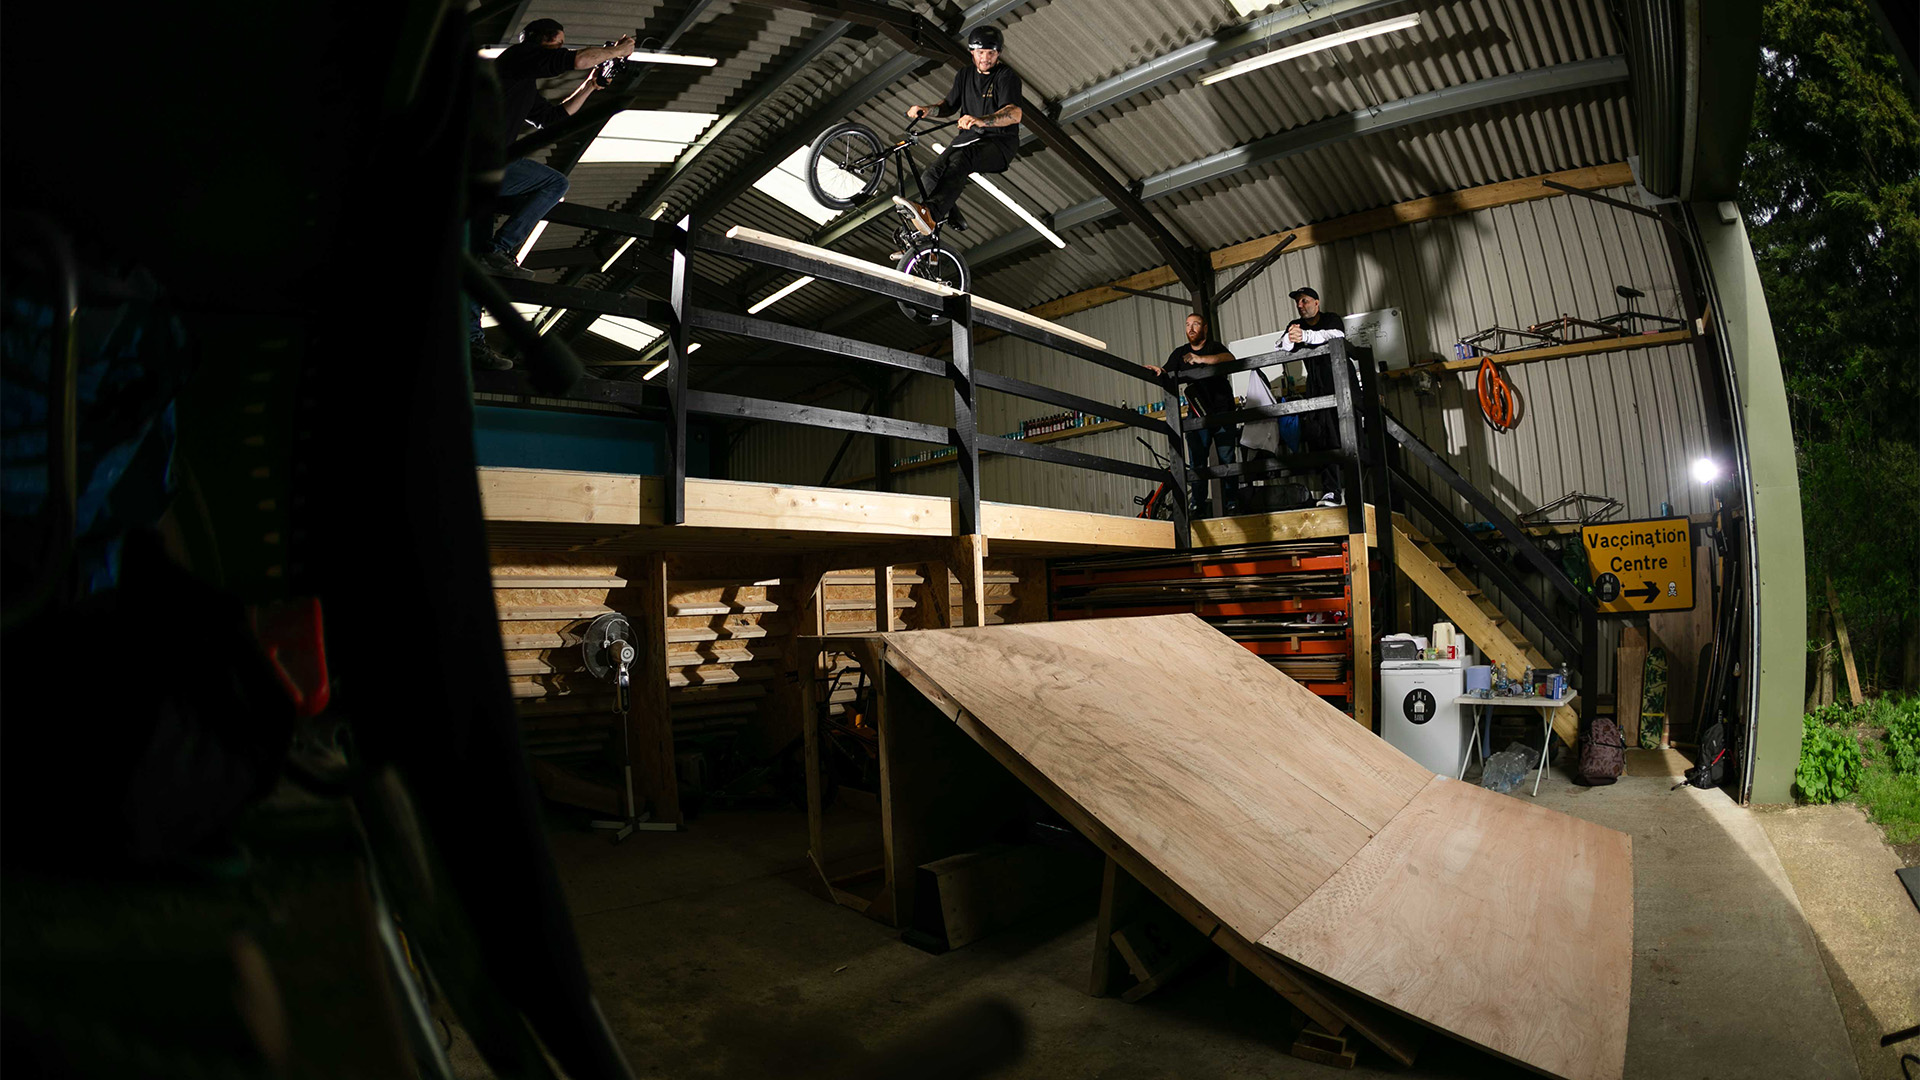 IN THE BARN: Video, Photo Gallery and Q&A at the BMX Barn